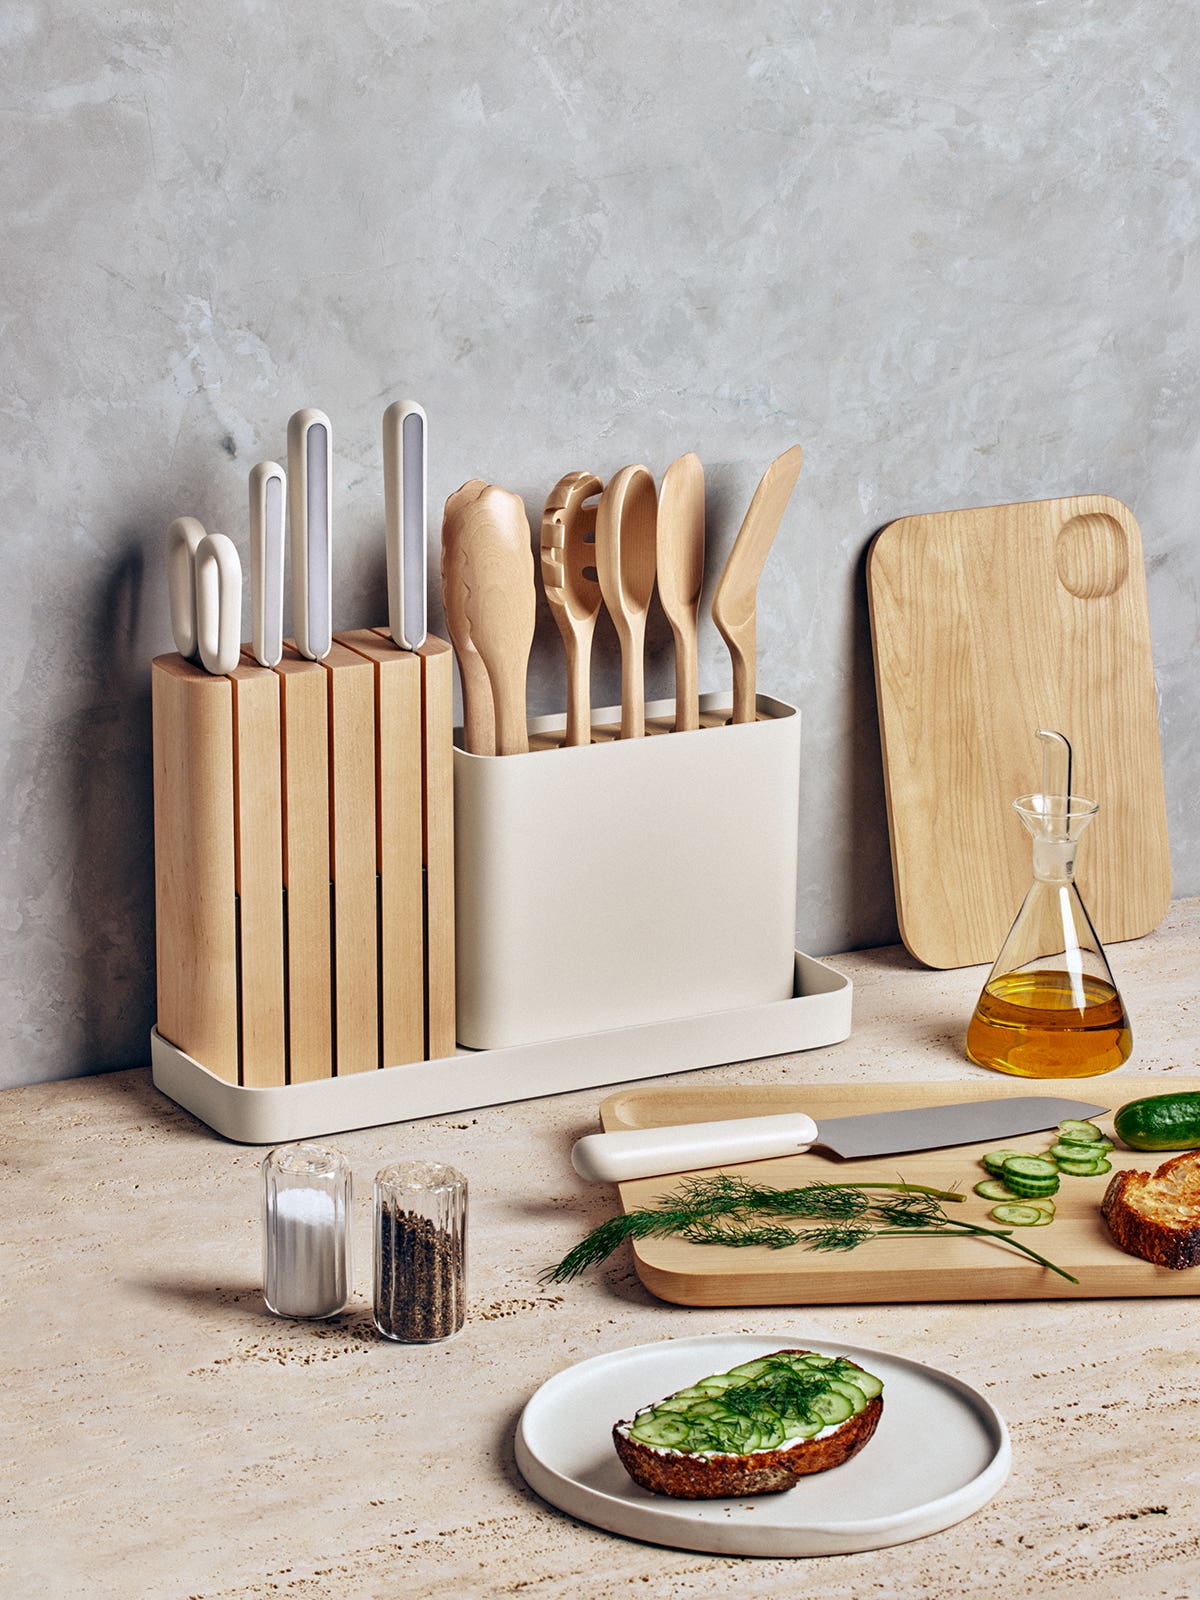 The Organizer That Cleared Up My Cluttered Kitchen Drawer Is Currently on Sale